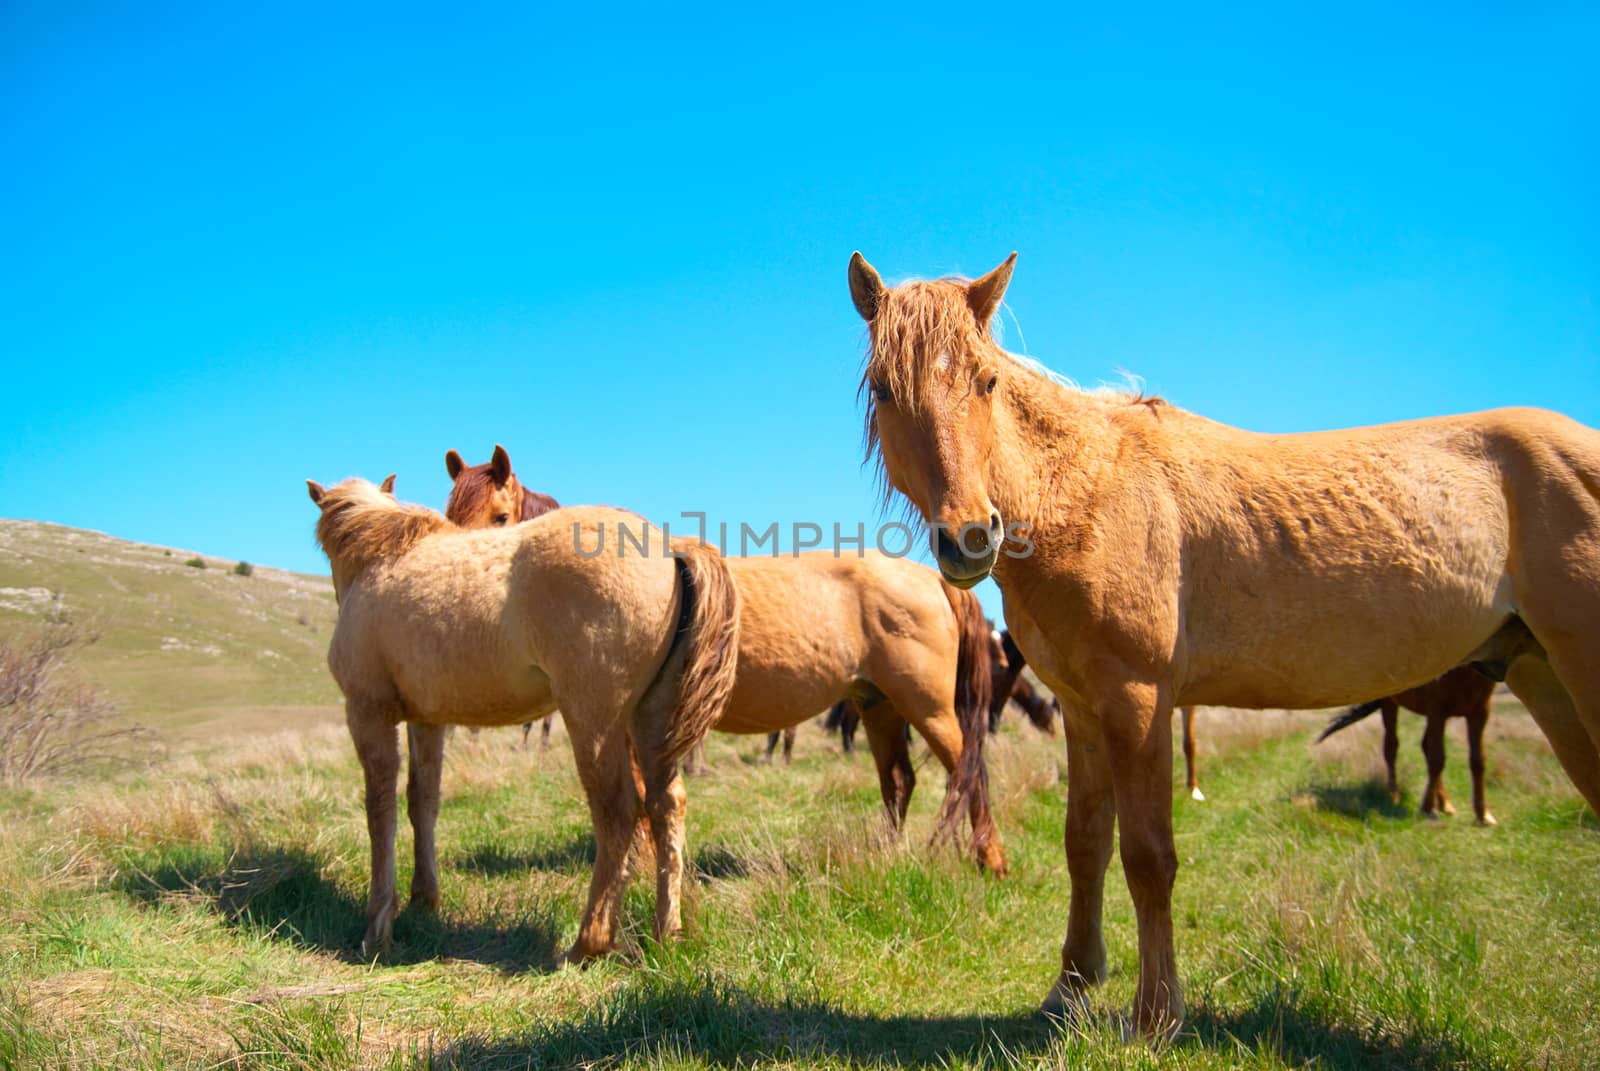 Herd of horses on the field with blue sky